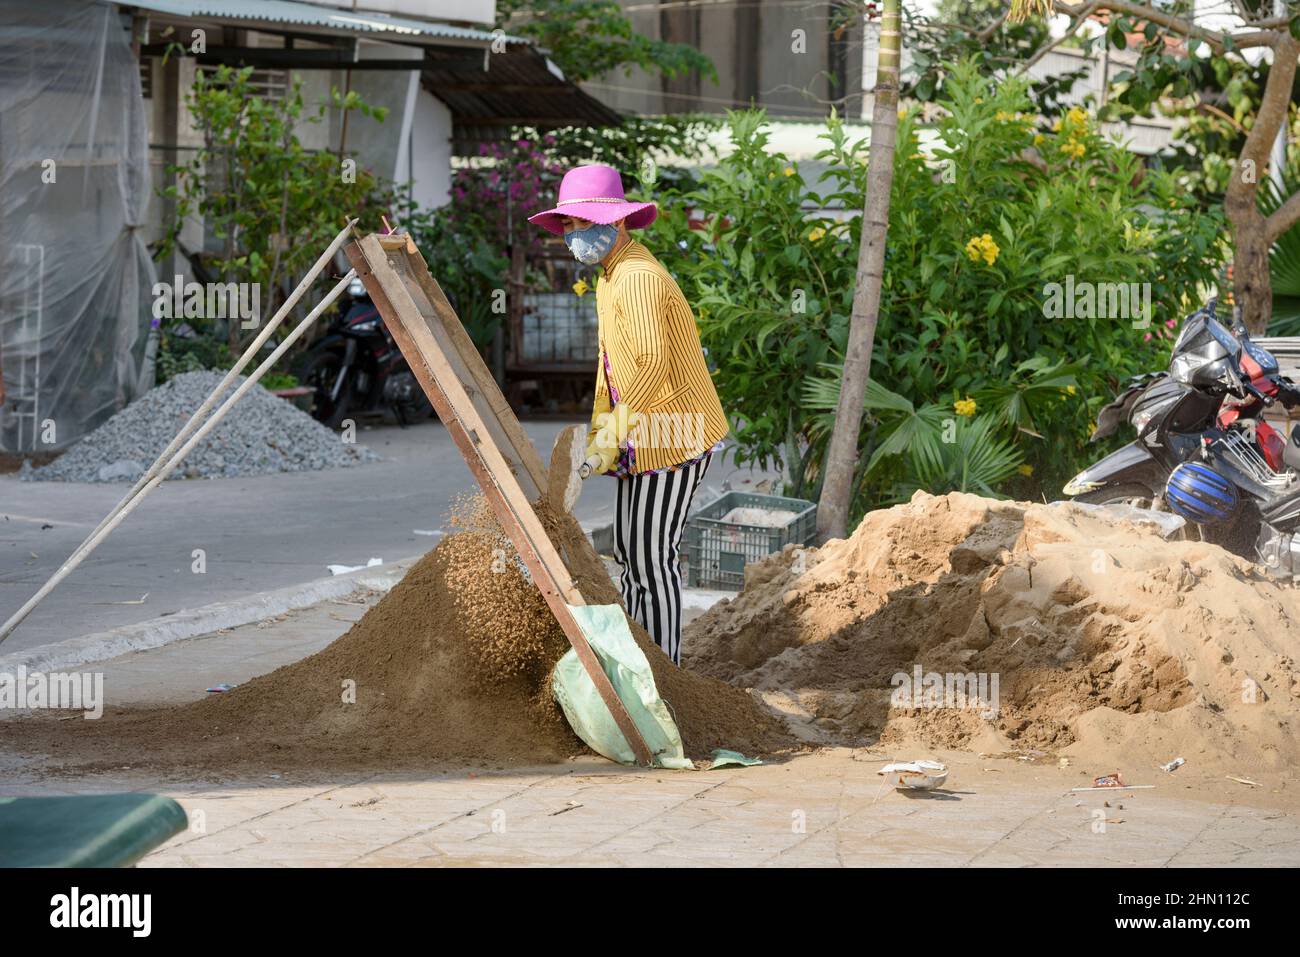 A young female labourer sifts soil using a large sieve at the roadside in Cai Rang, near Can Tho, Mekong Delta, Southern Vietnam, Southeast Asia Stock Photo